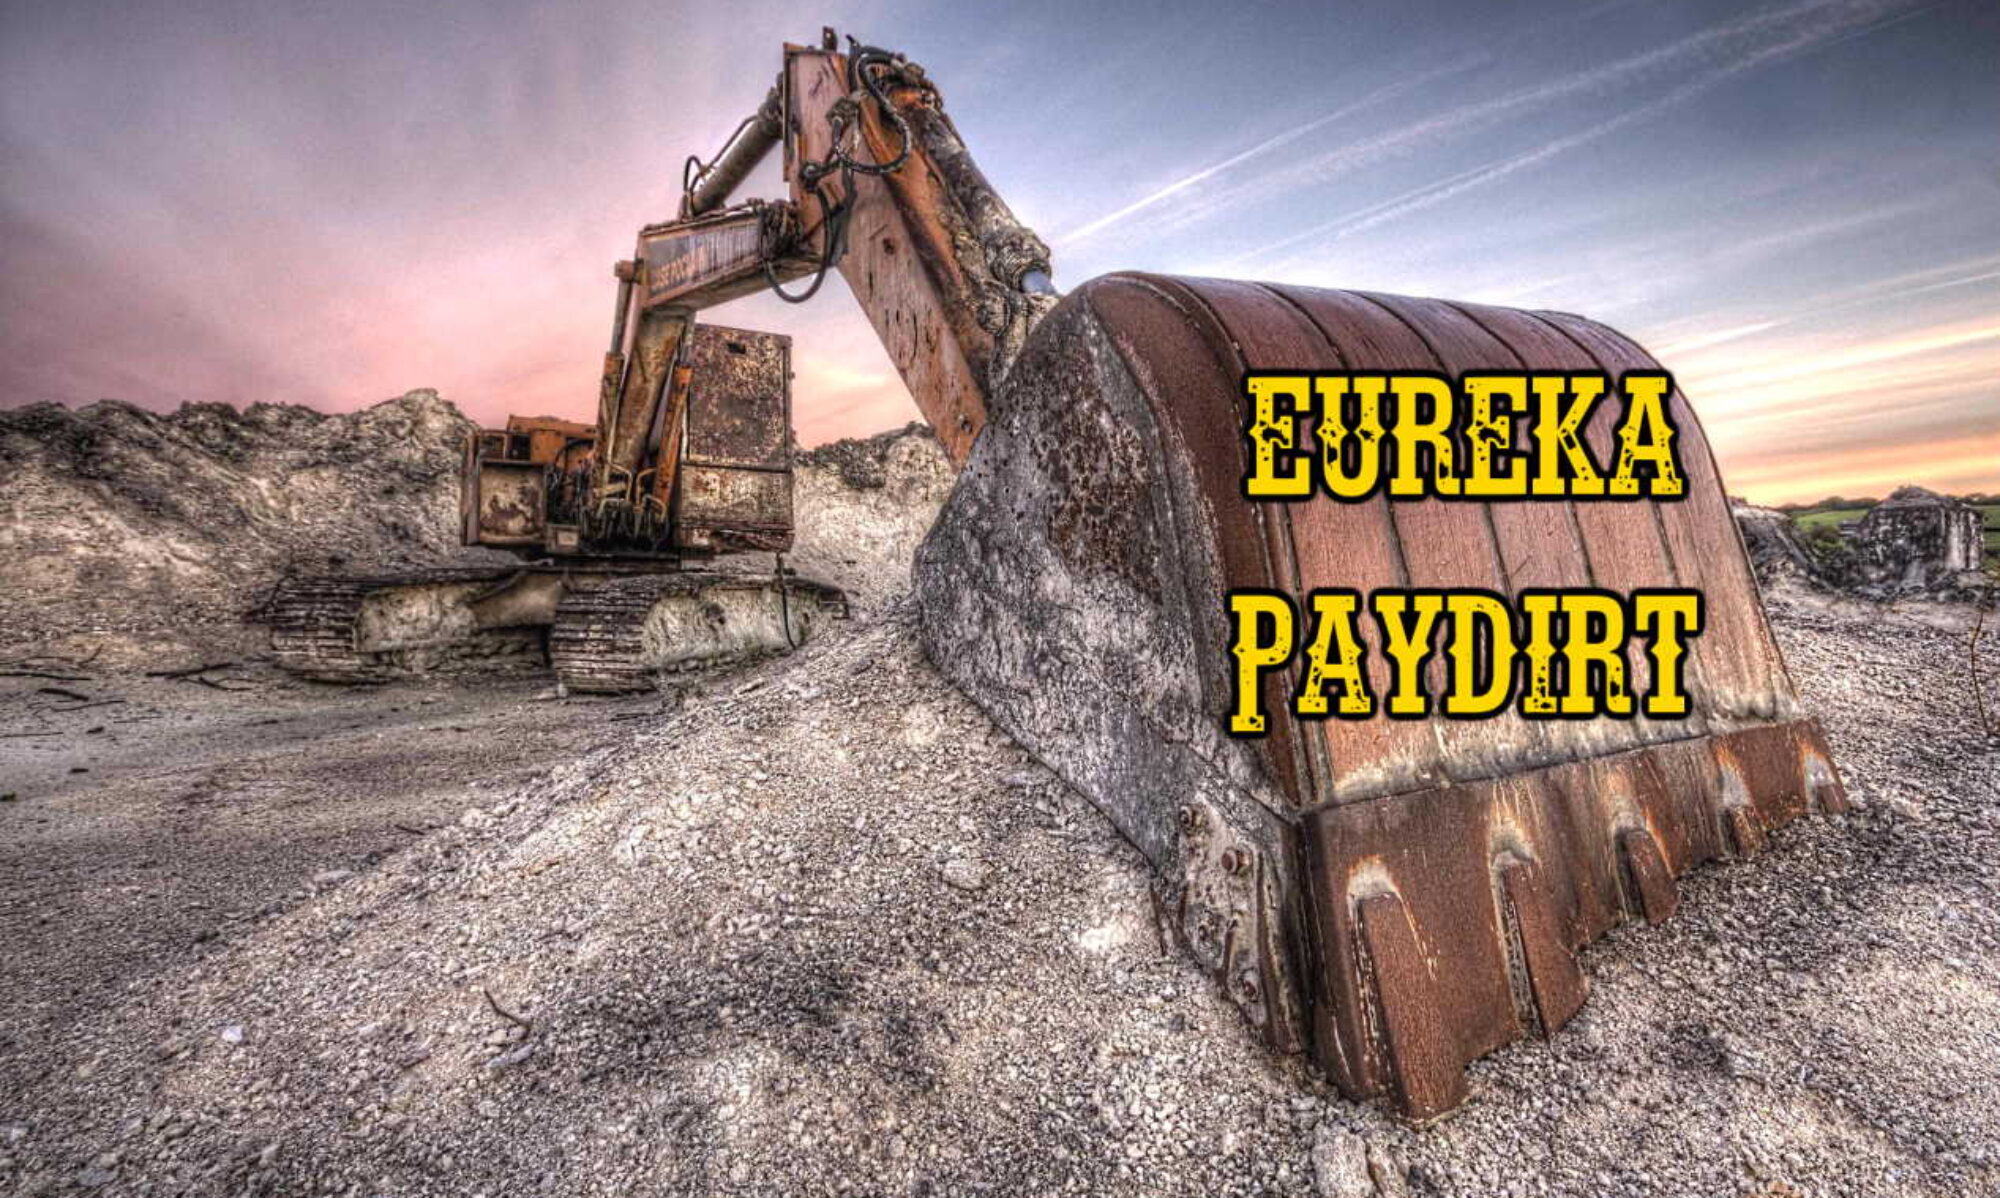 Eureka Paydirt - Contains Real Gold From the Yukon!